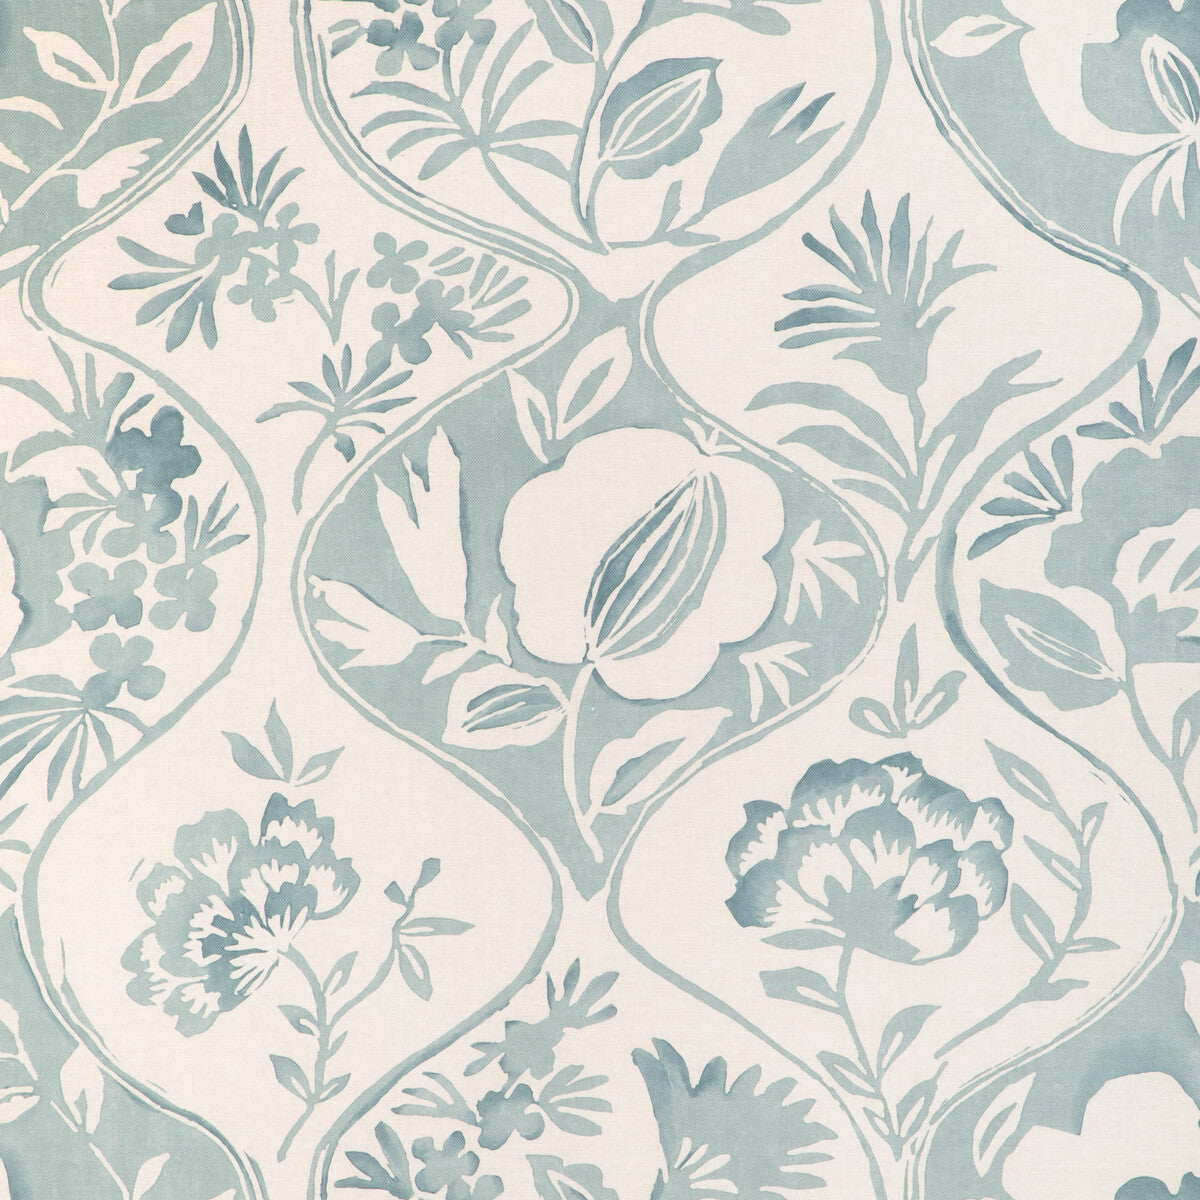 Calathea Print fabric in aqua color - pattern 2023141.13.0 - by Lee Jofa in the Garden Walk collection